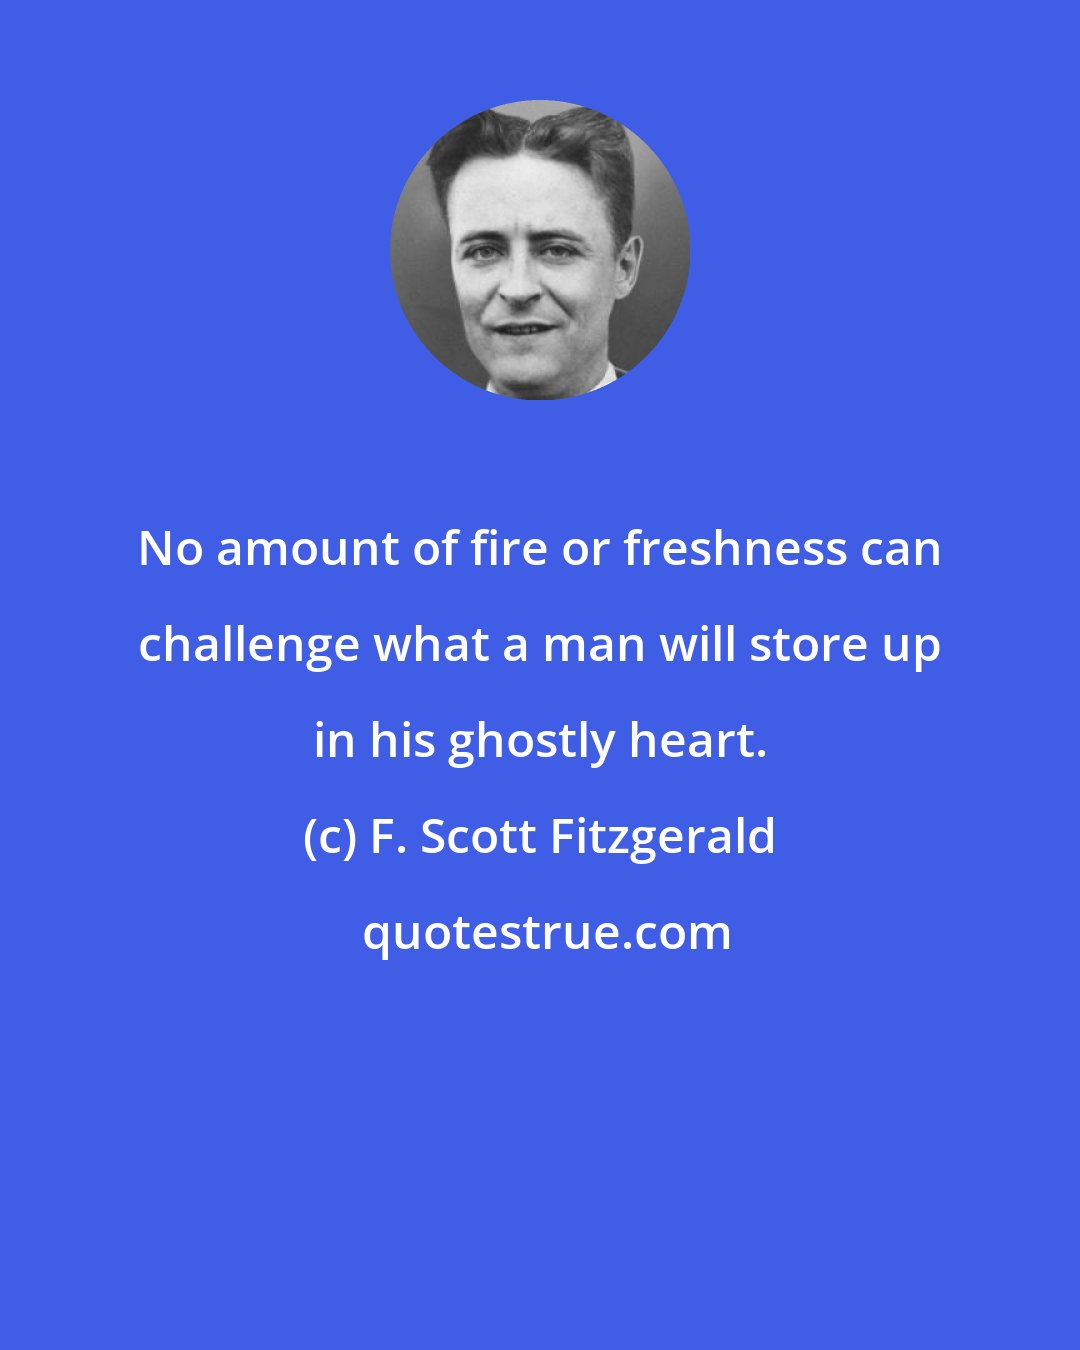 F. Scott Fitzgerald: No amount of fire or freshness can challenge what a man will store up in his ghostly heart.